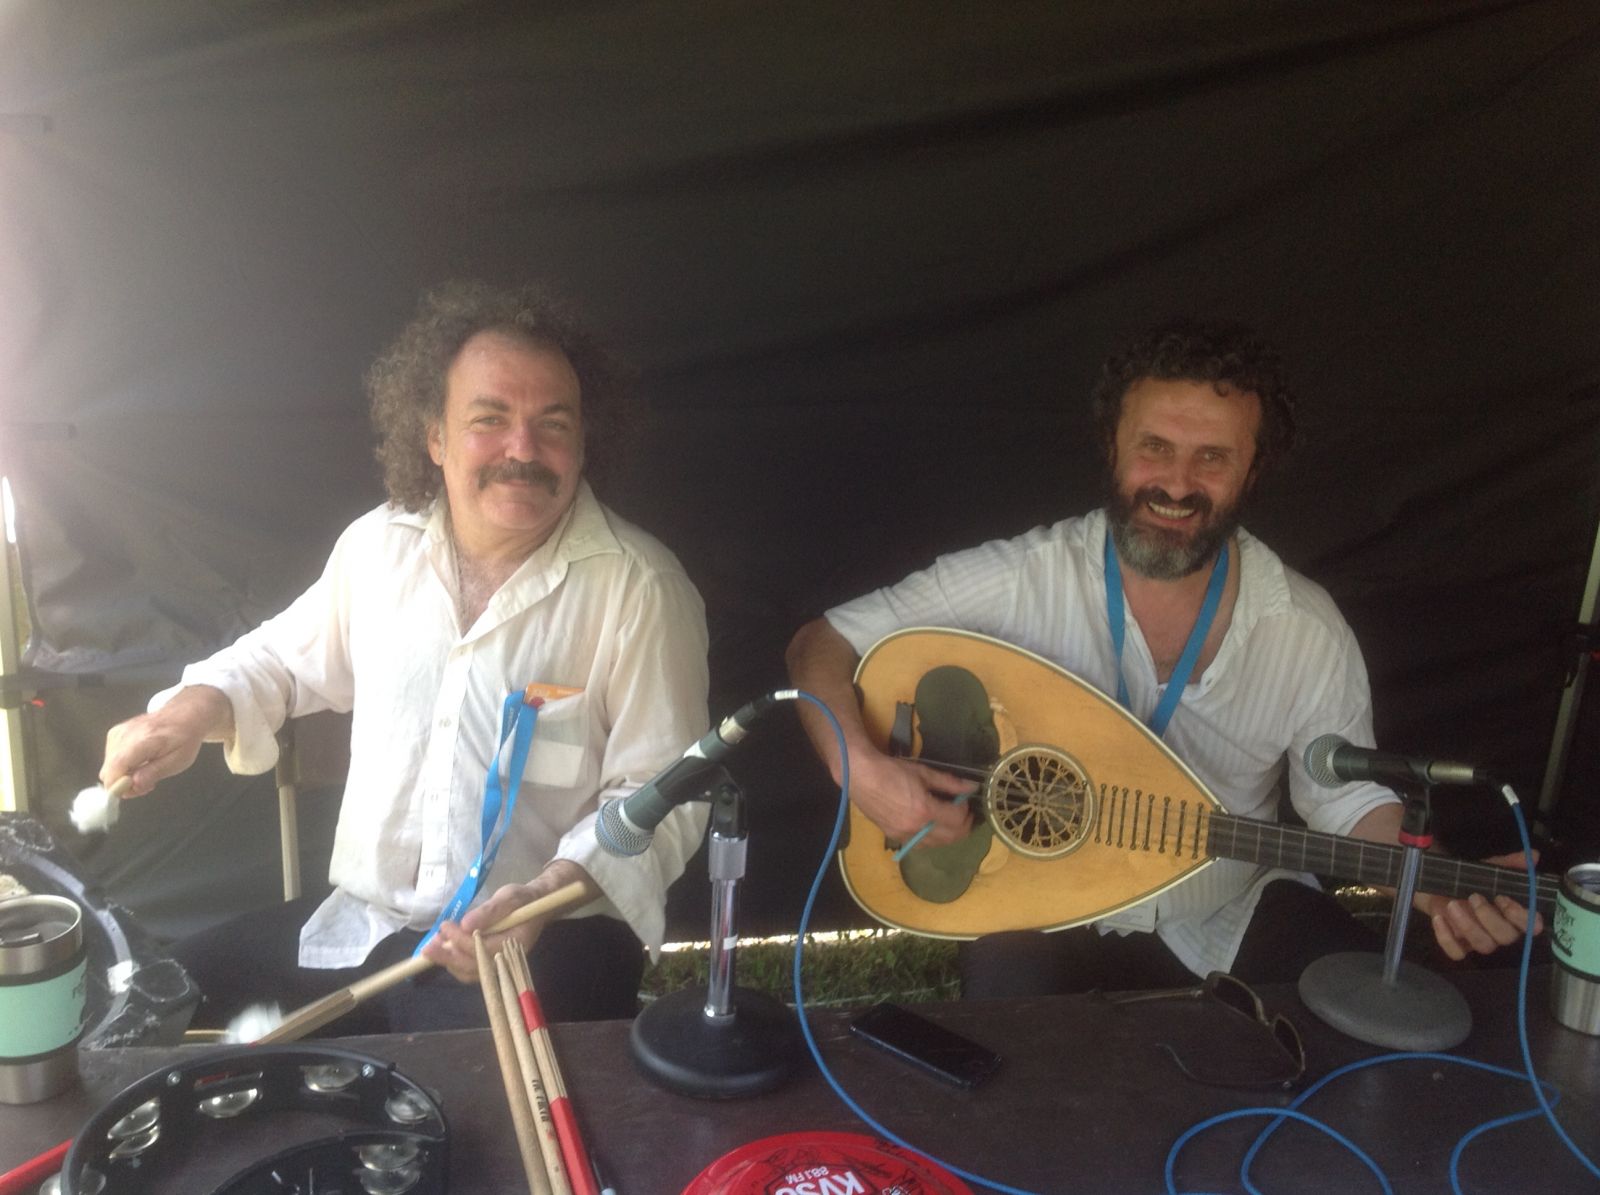 George Xylouris and Jim White of the Xylouris White band play for KVSC at WFF 2015